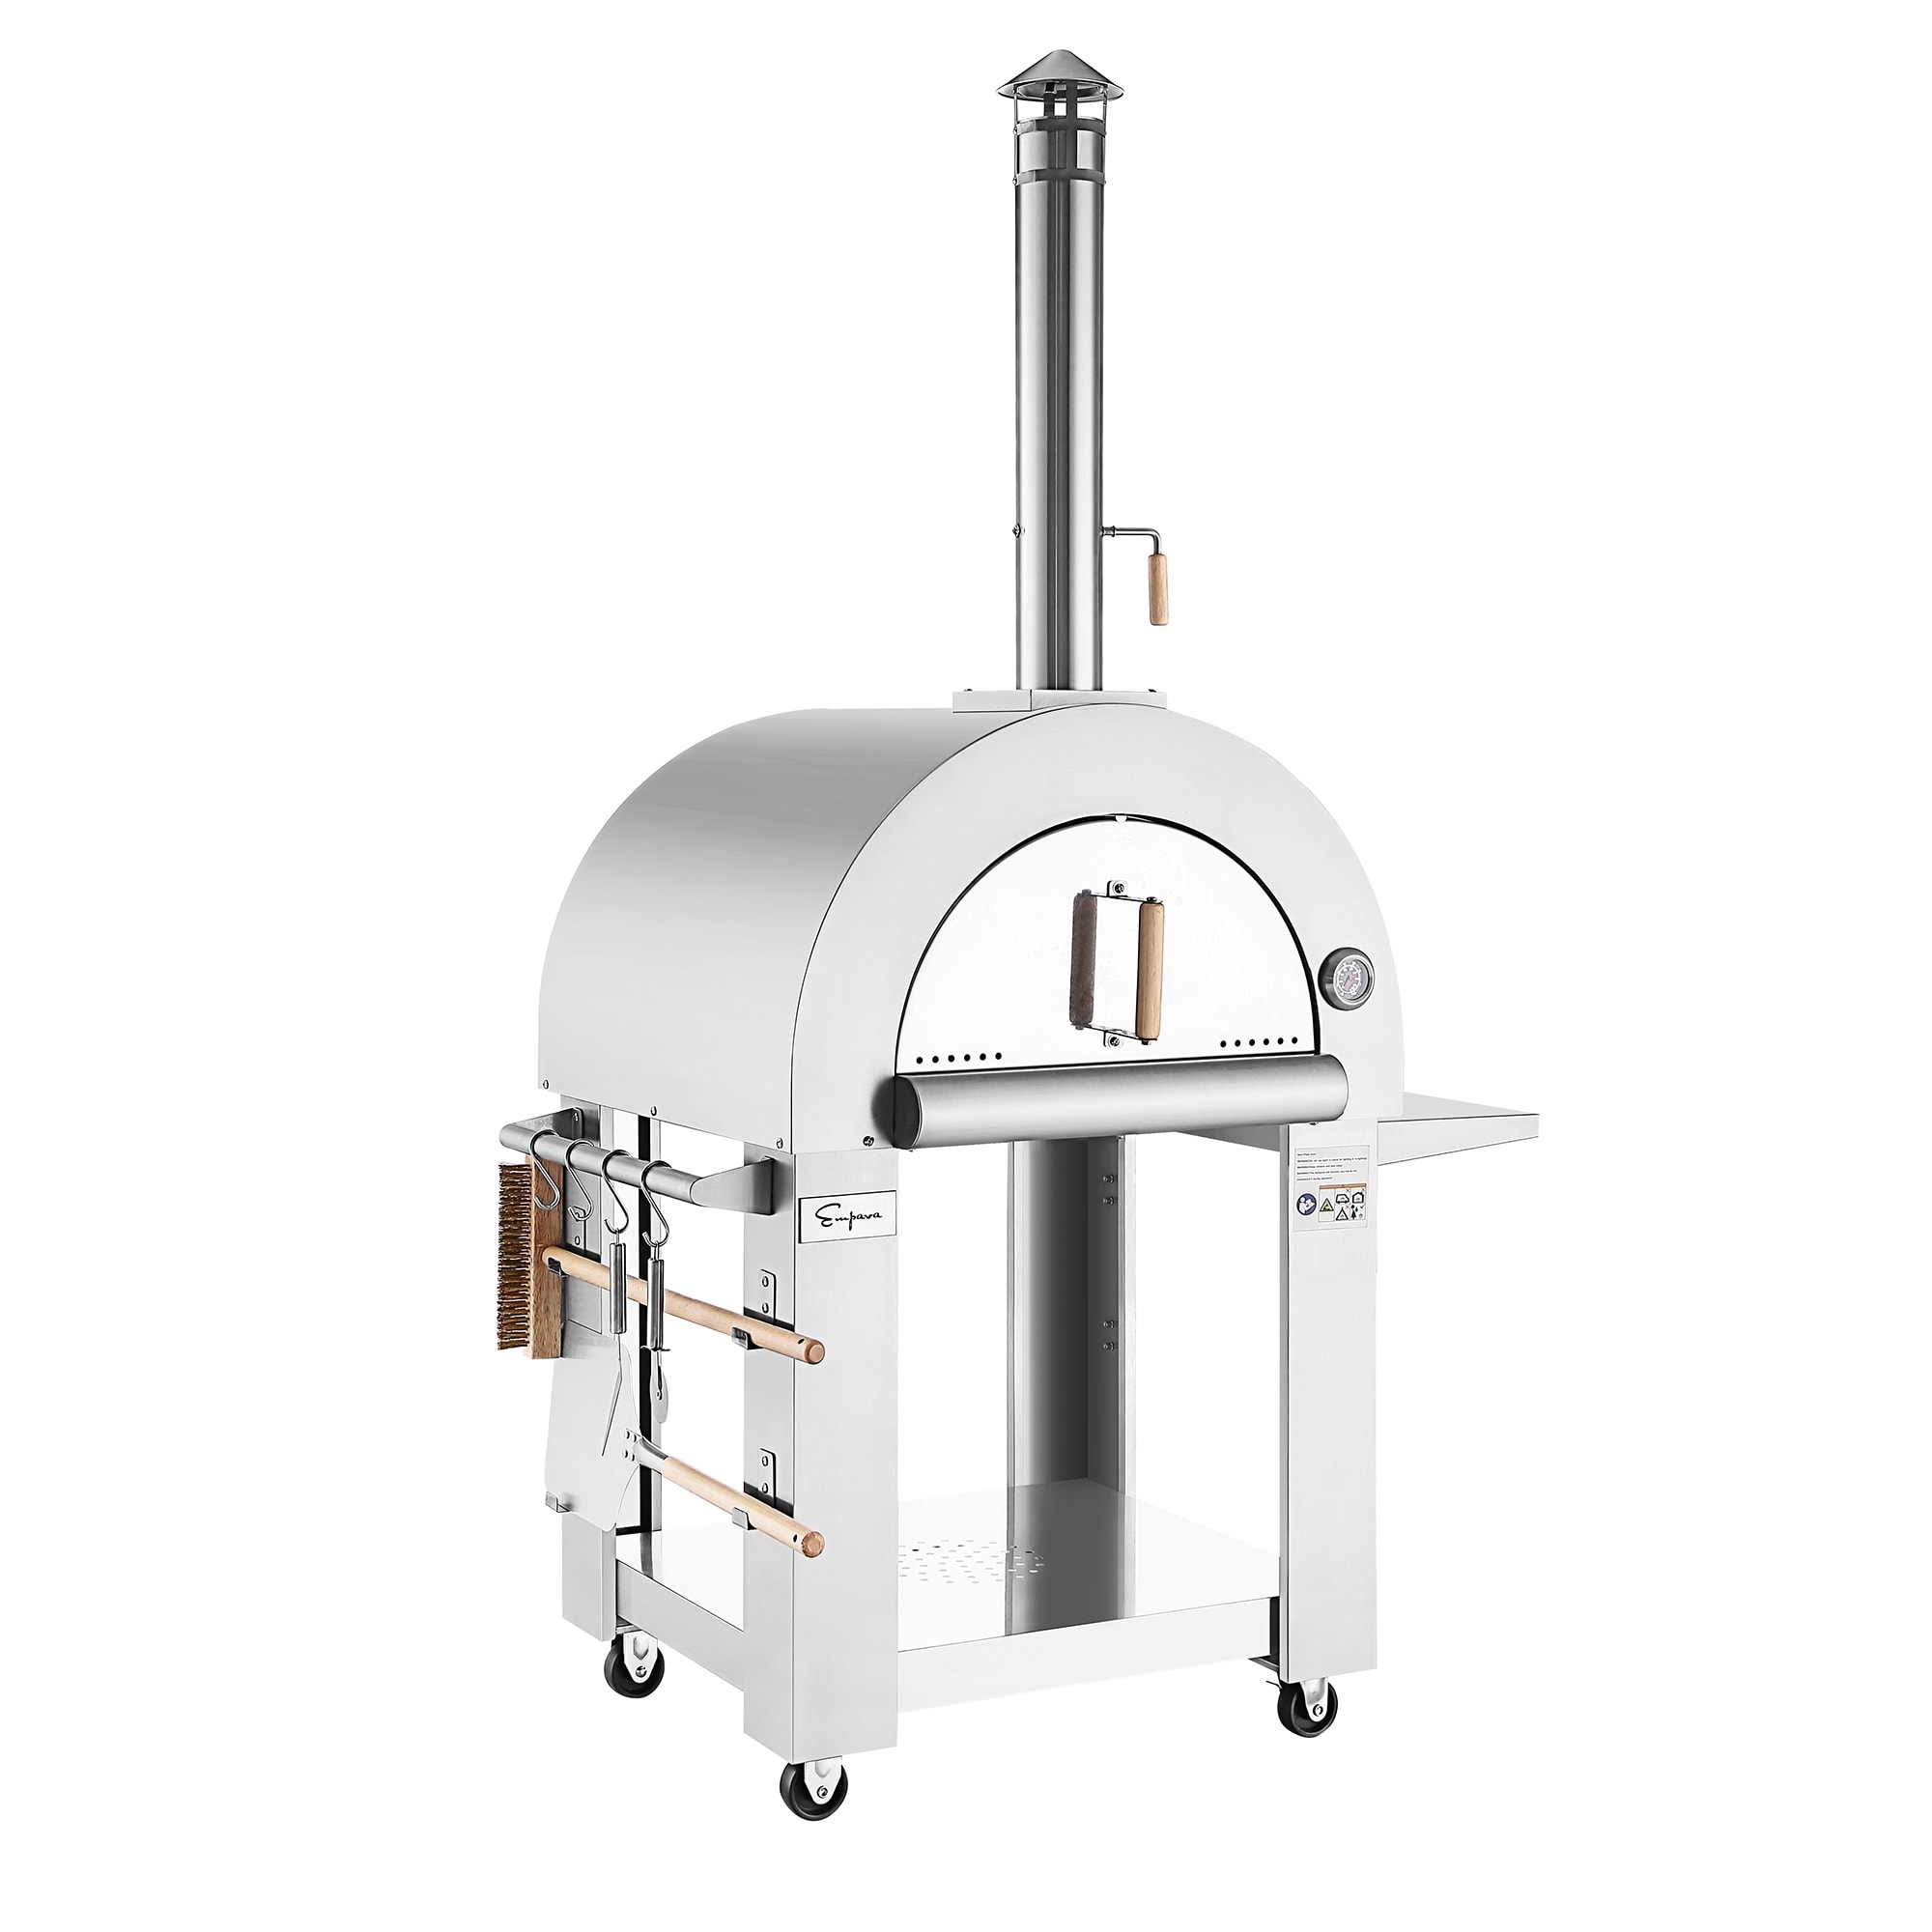 Empava Free Standing Wood Burning Outdoor Pizza Oven With Side Panel In Stainless Steel